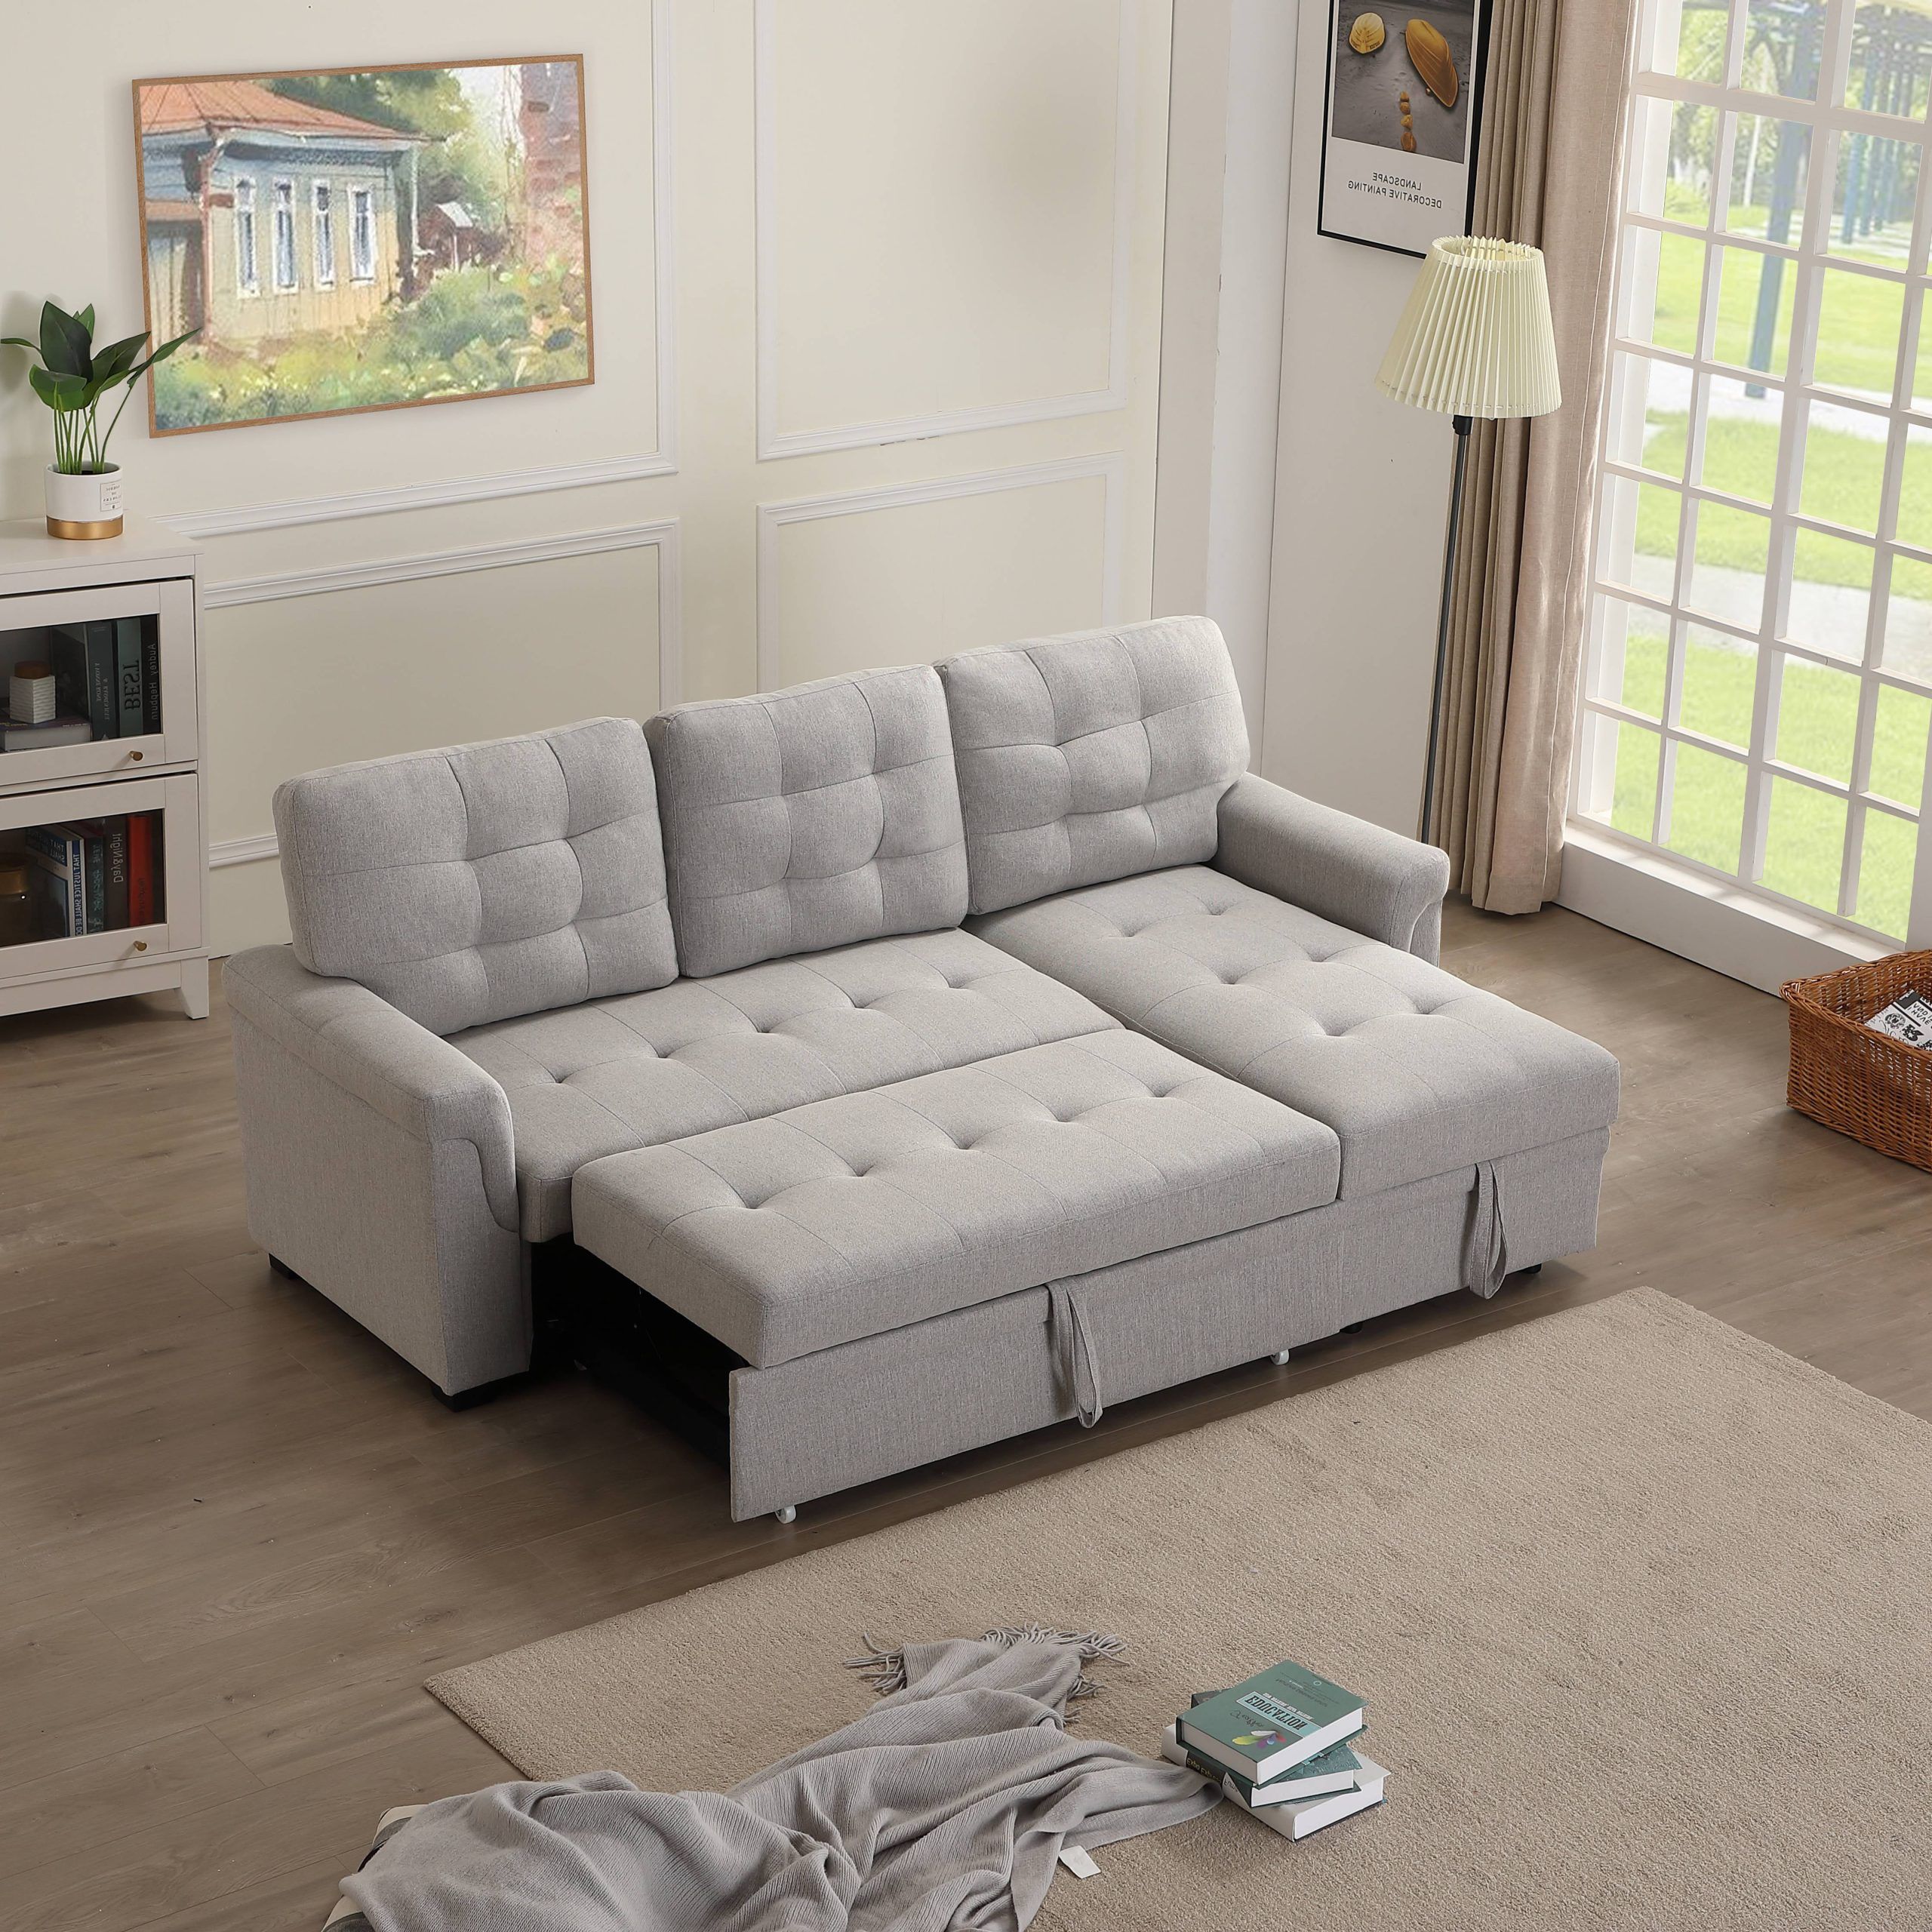 Madison Home Traditional Small Space Velvet Sectional Sofa With In Modern Velvet Sofa Recliners With Storage (View 10 of 20)